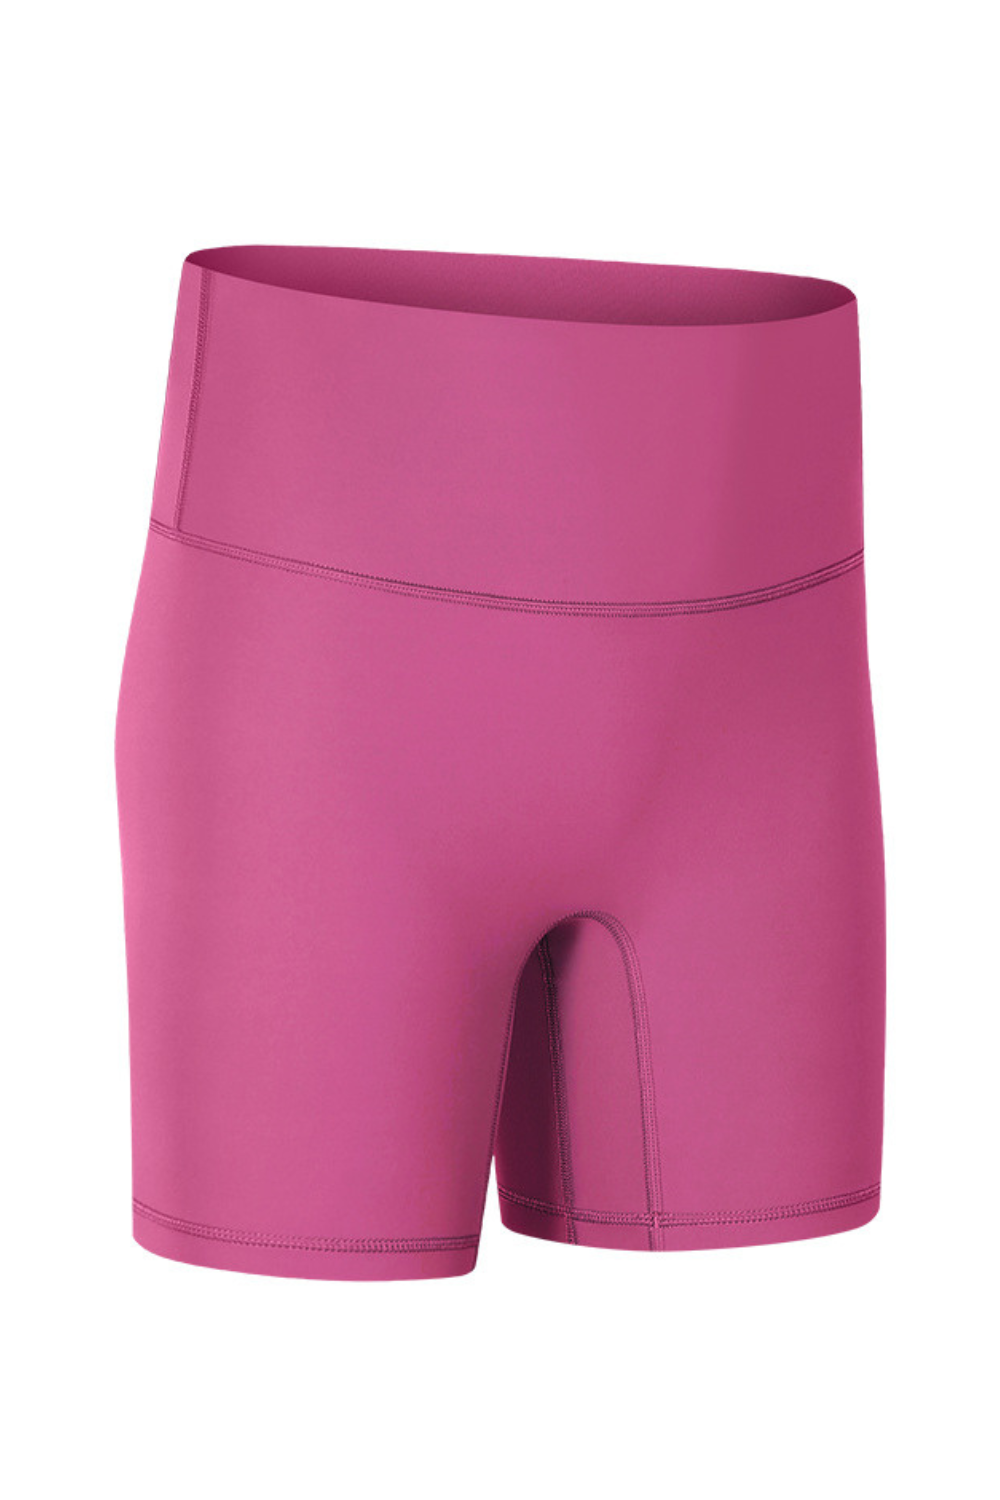 Rose Pink "Mia" Comfort High Rise Quick Dry Second Skin Shorts